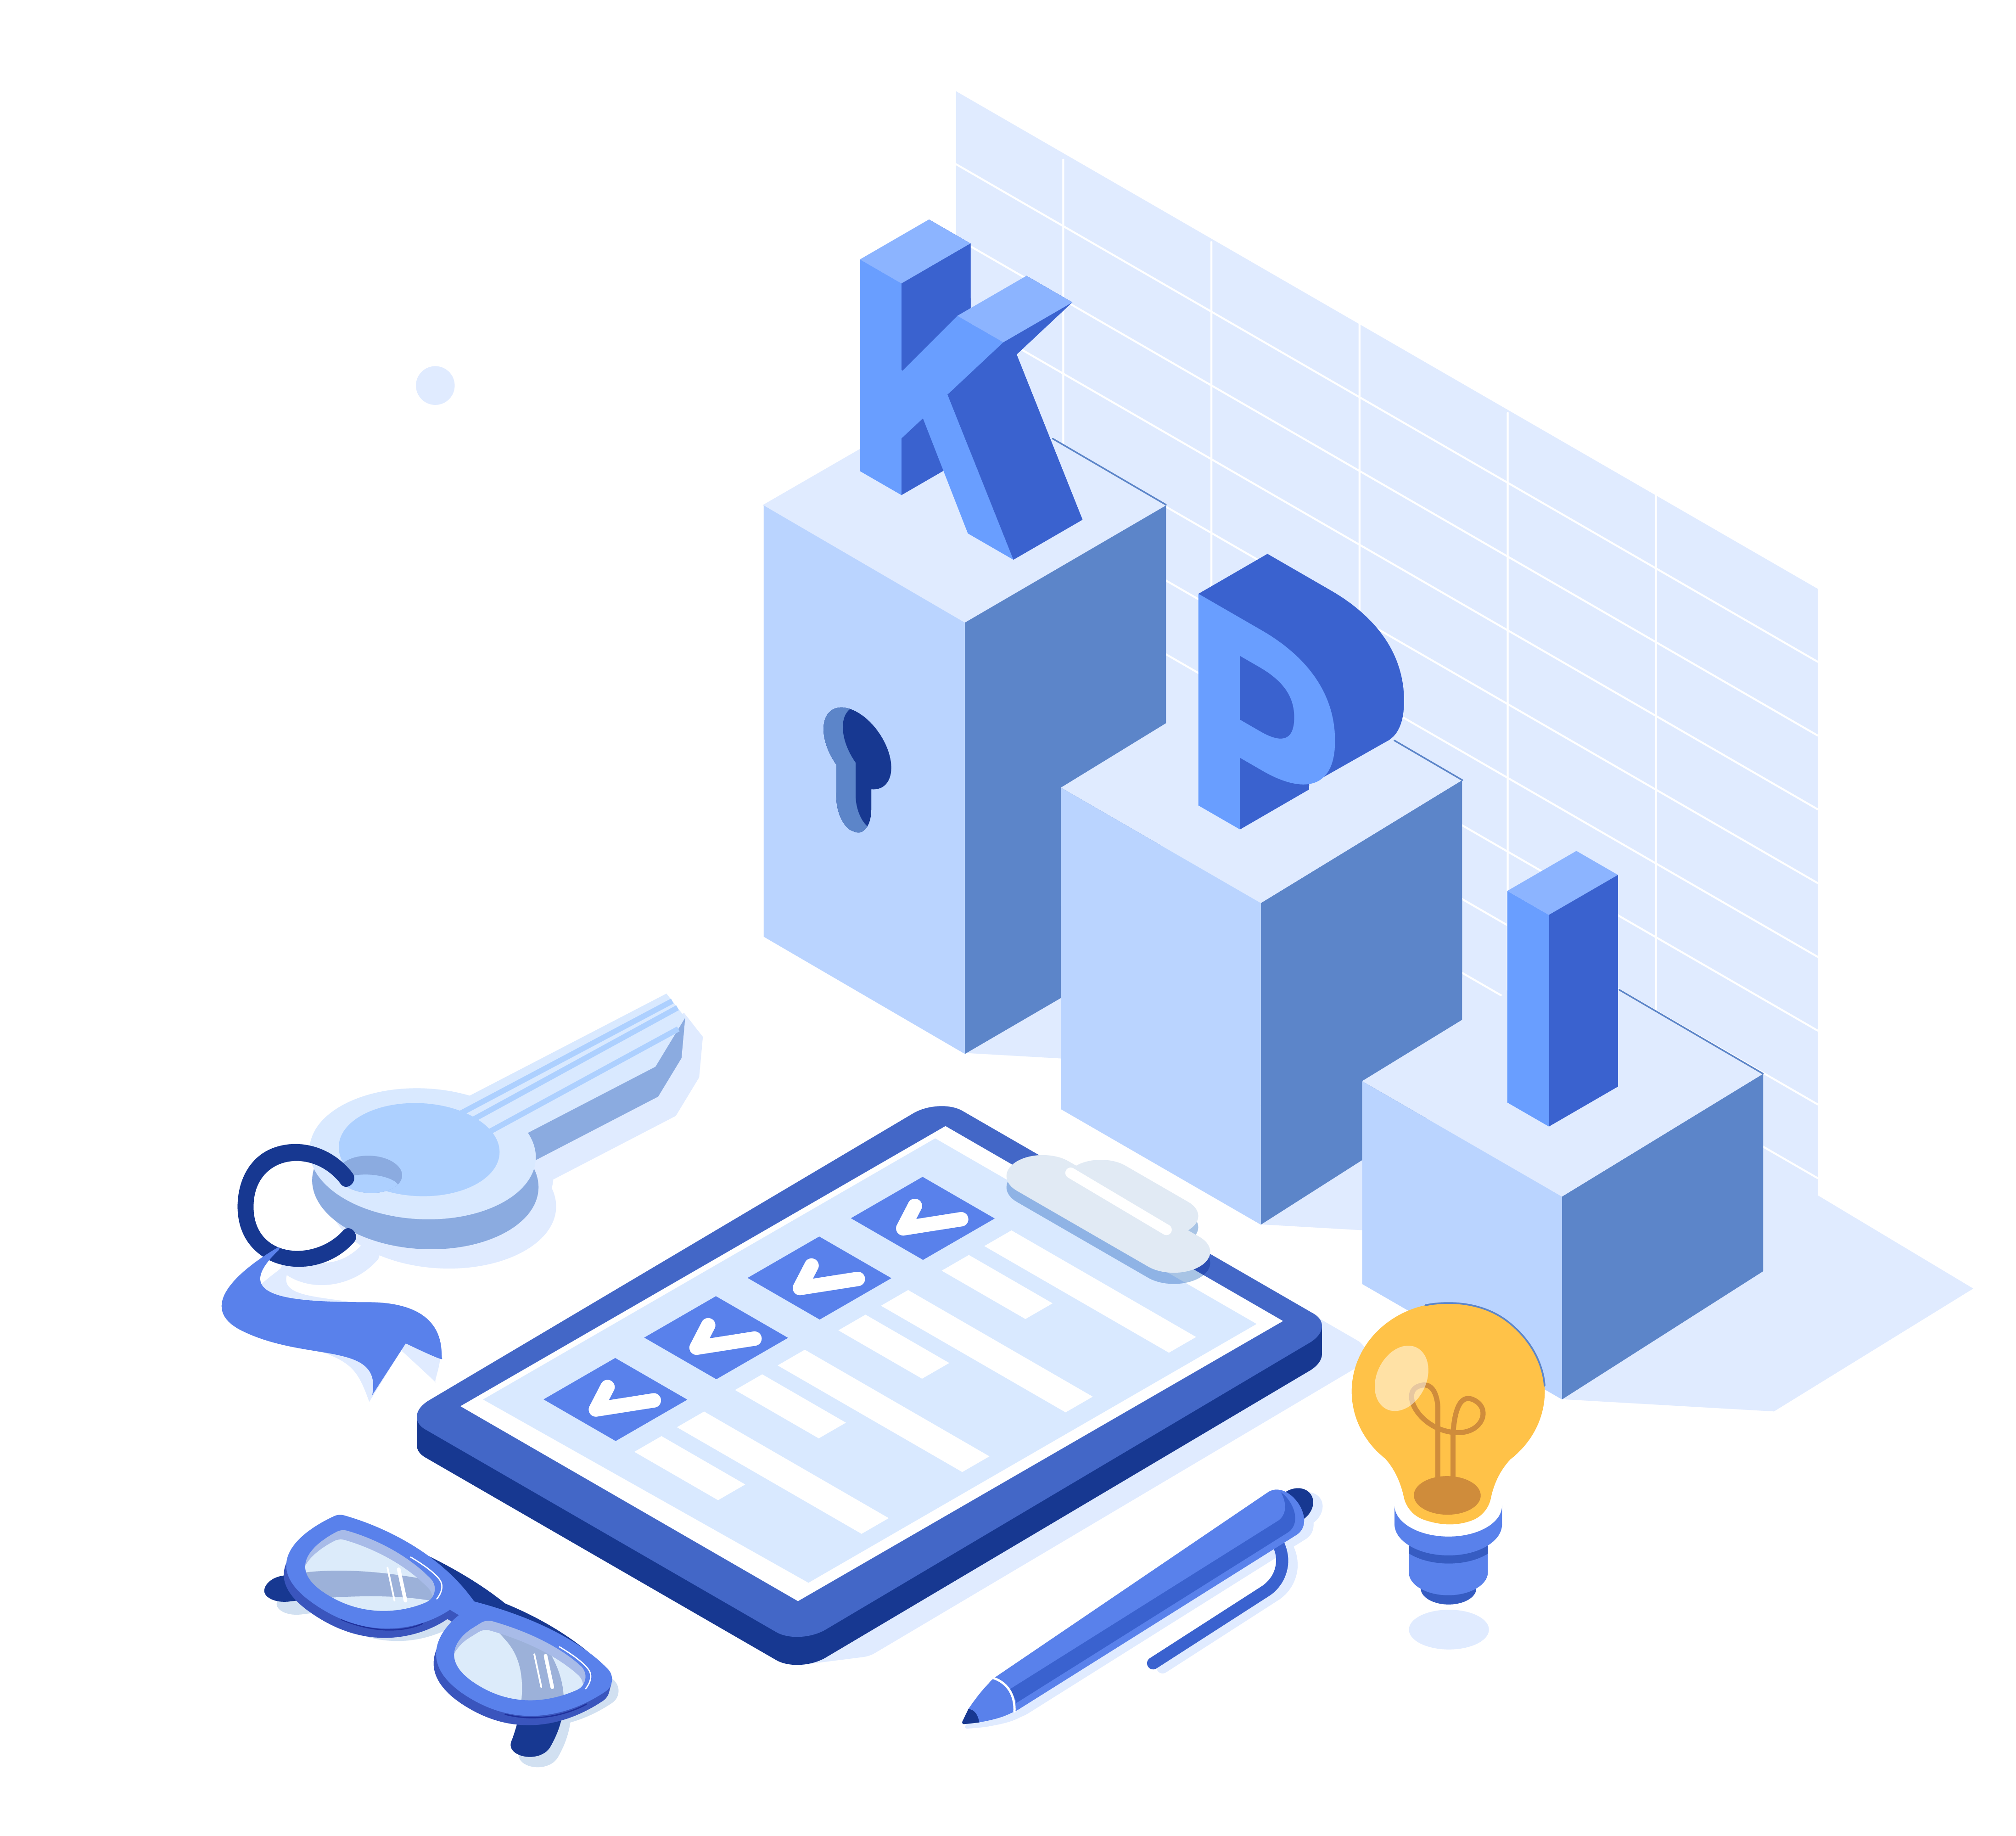 Large Block 'KPI' Letter  over a rising graph with notebooks and keys placed in front. 3d blue illustration.